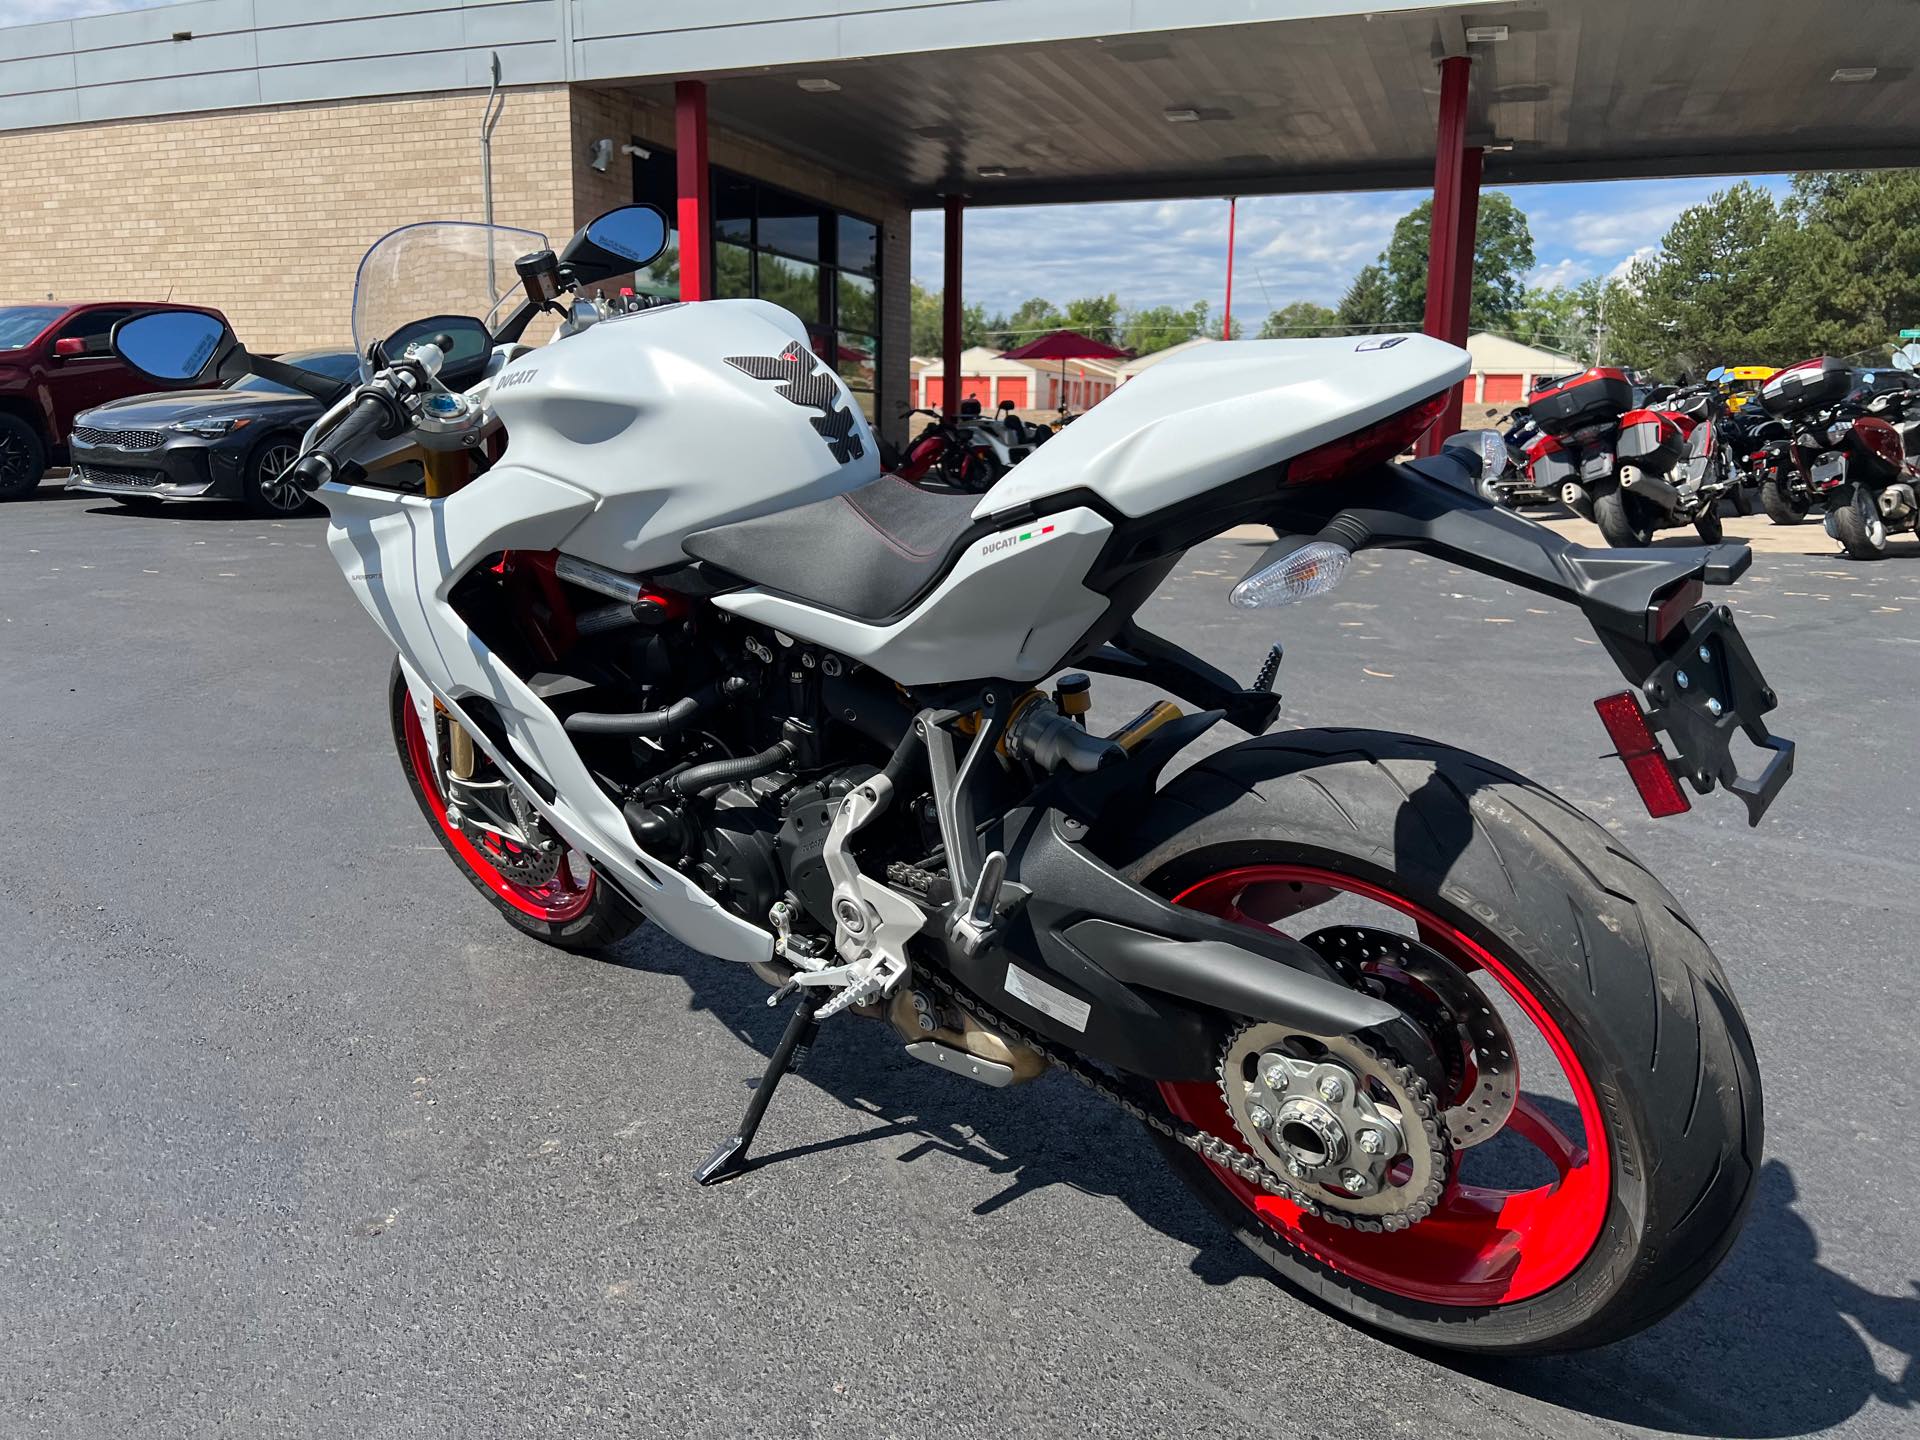 2019 Ducati SuperSport S at Aces Motorcycles - Fort Collins